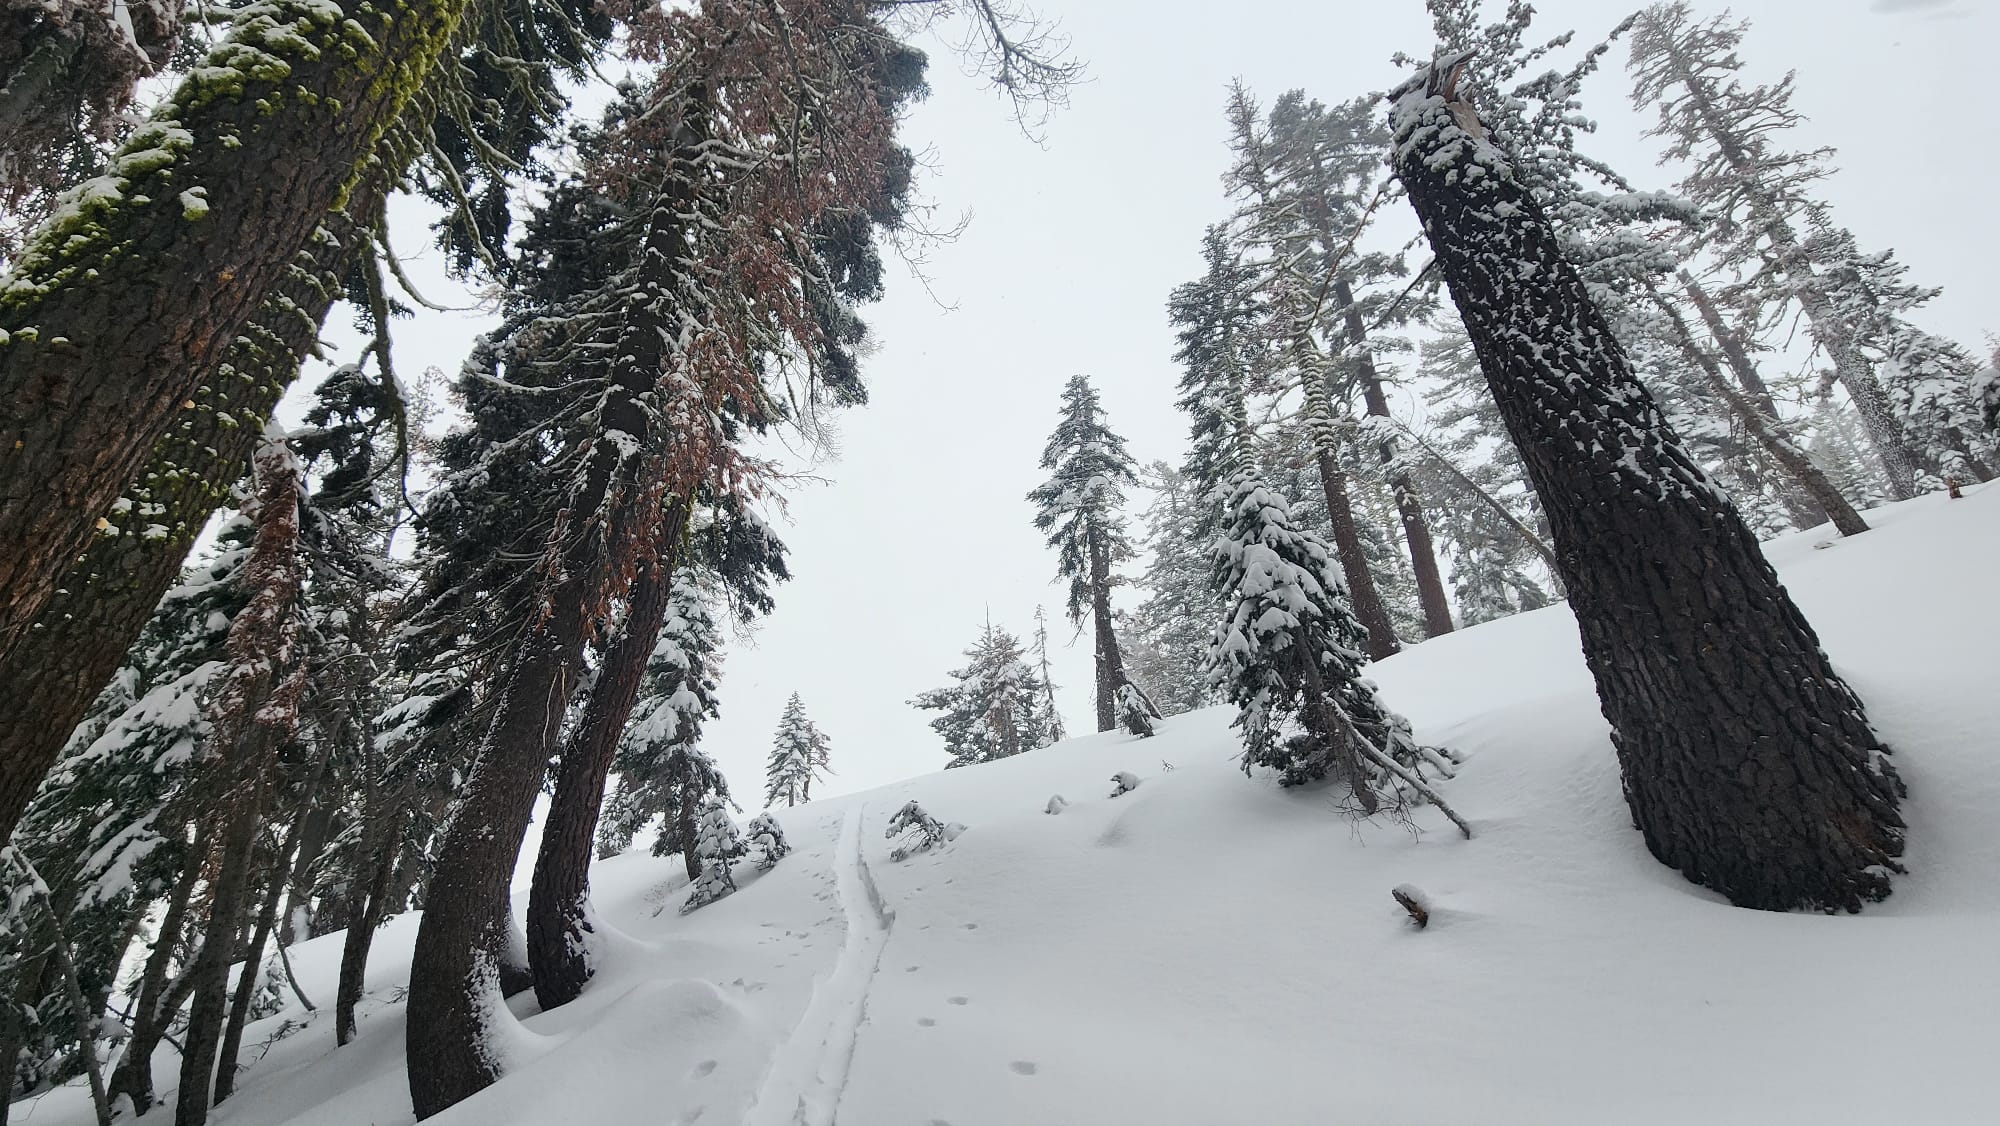 backcountry skiing conditions in Tahoe